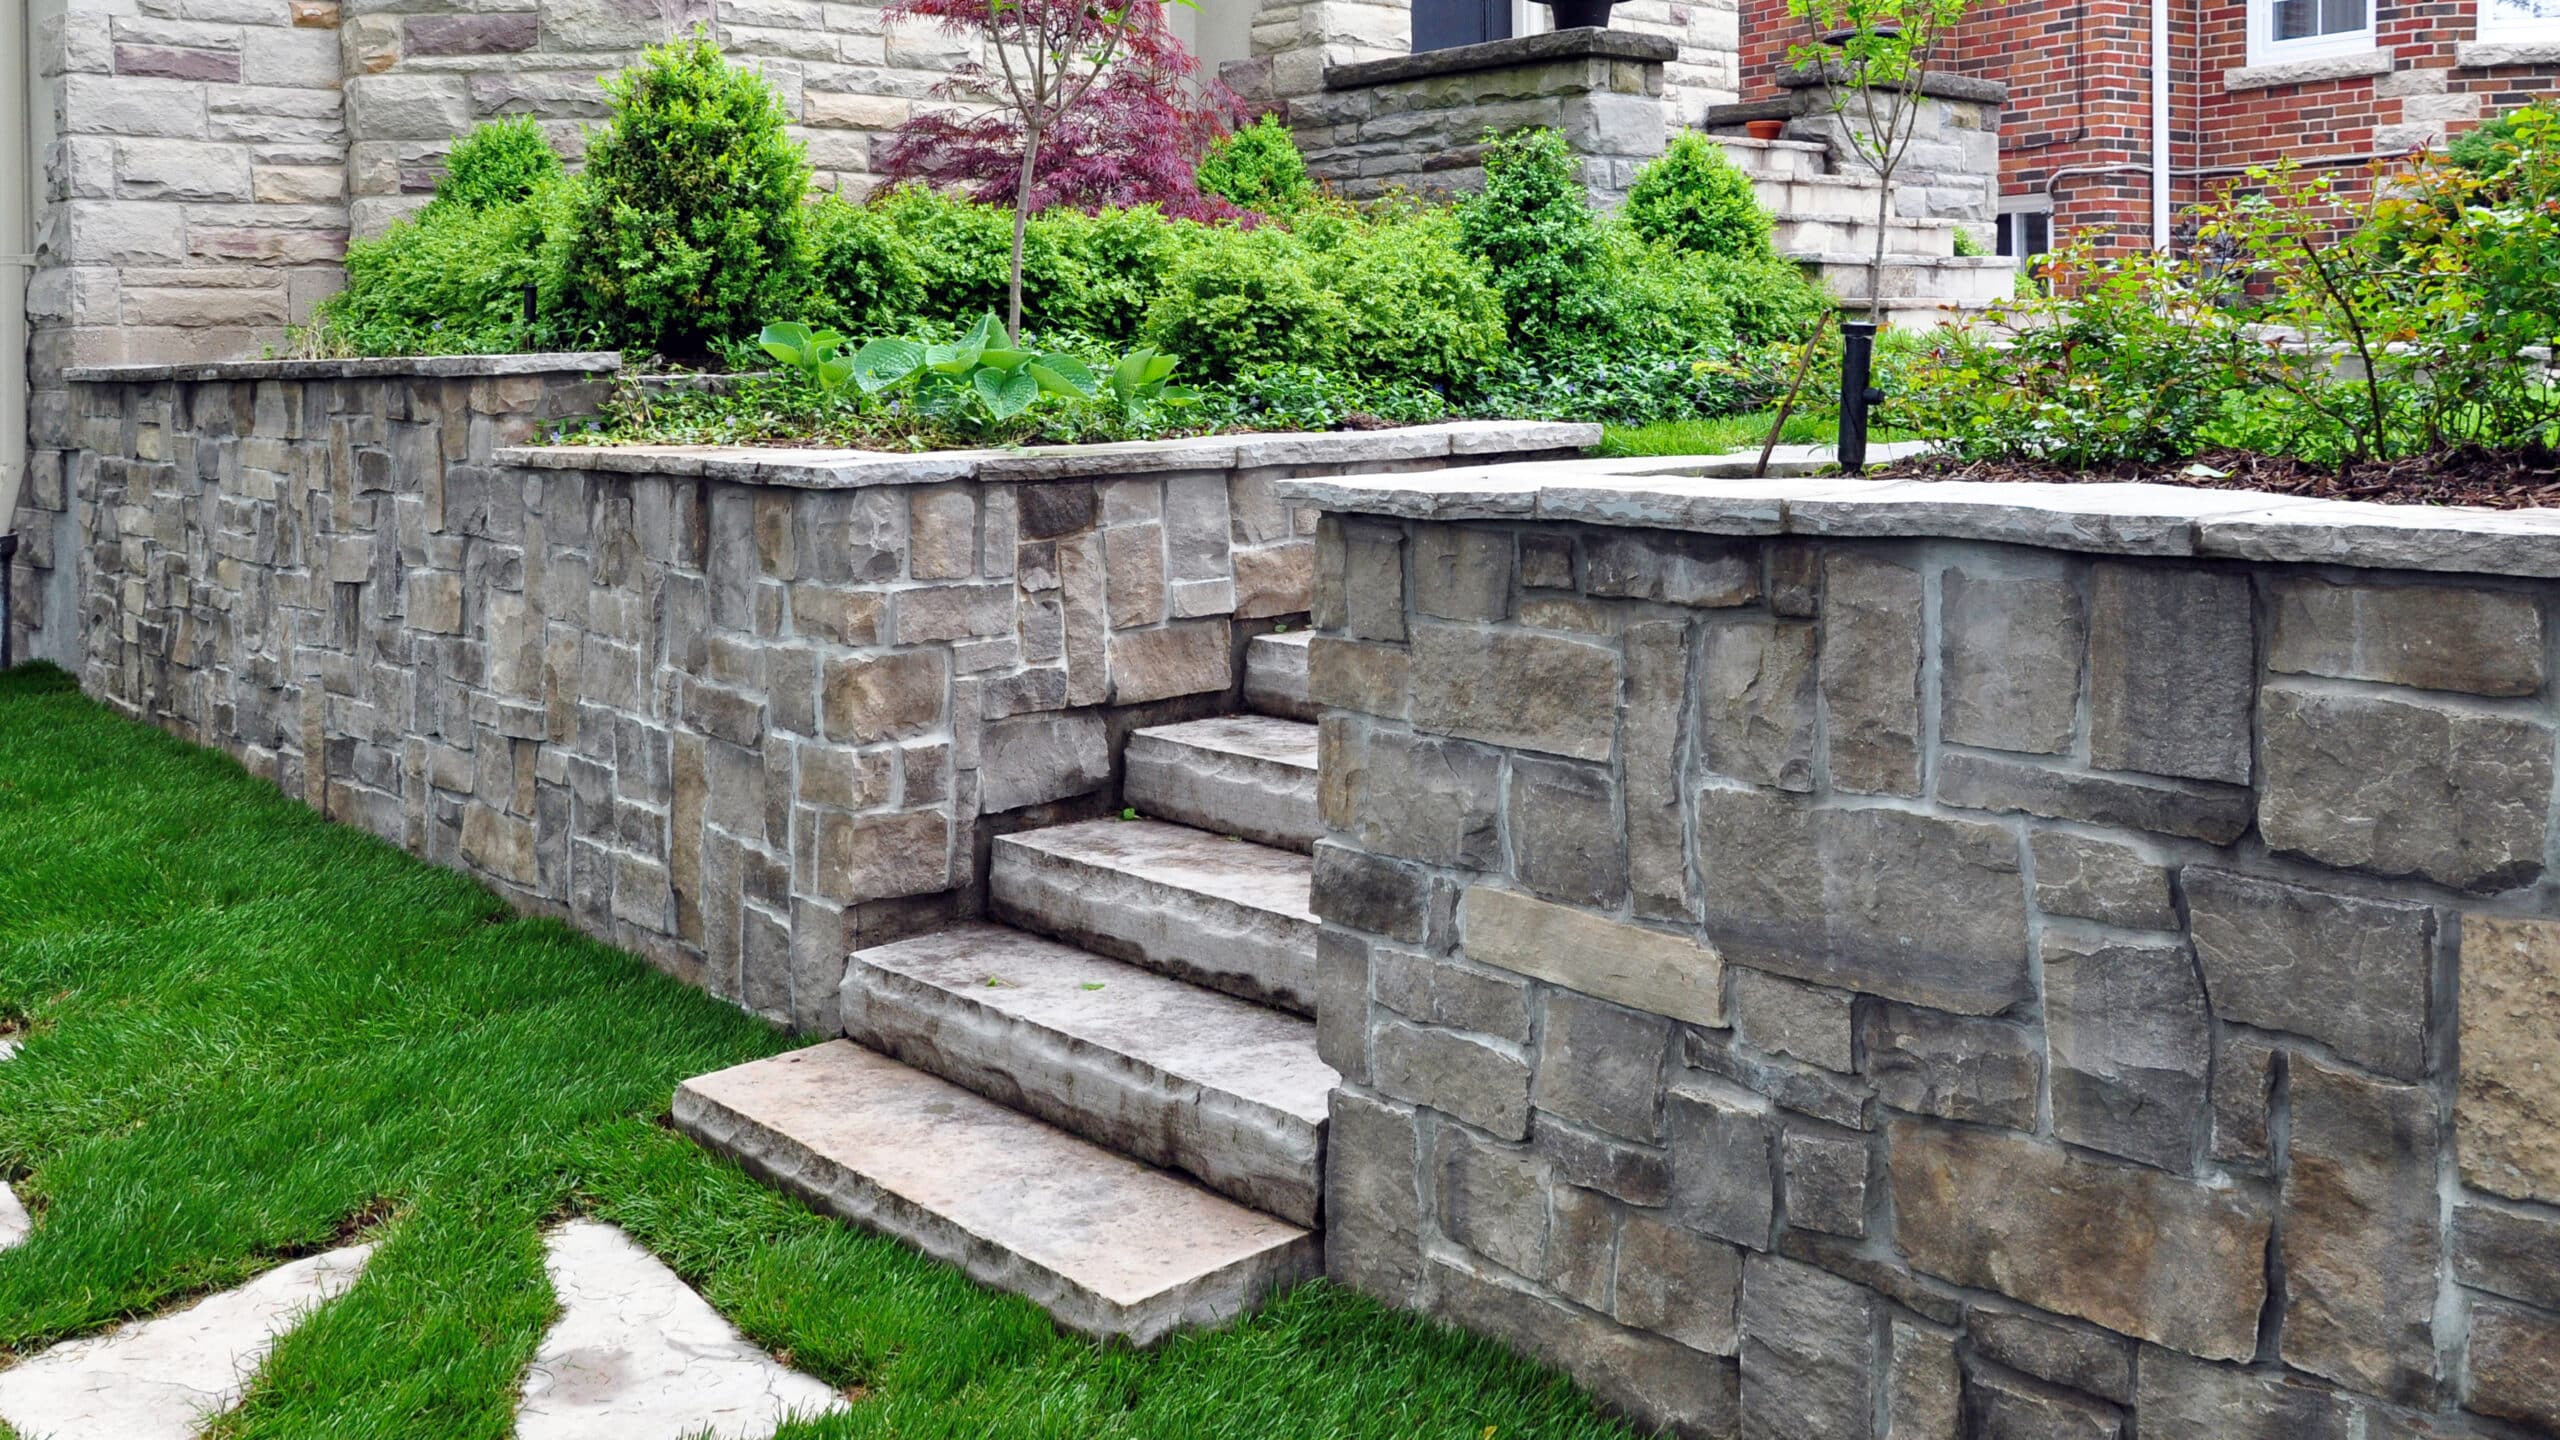 6 Excellent Retaining Wall Ideas For Dallas-Fort Worth Metroplex 7 | AdobeStock 422410419 scaled